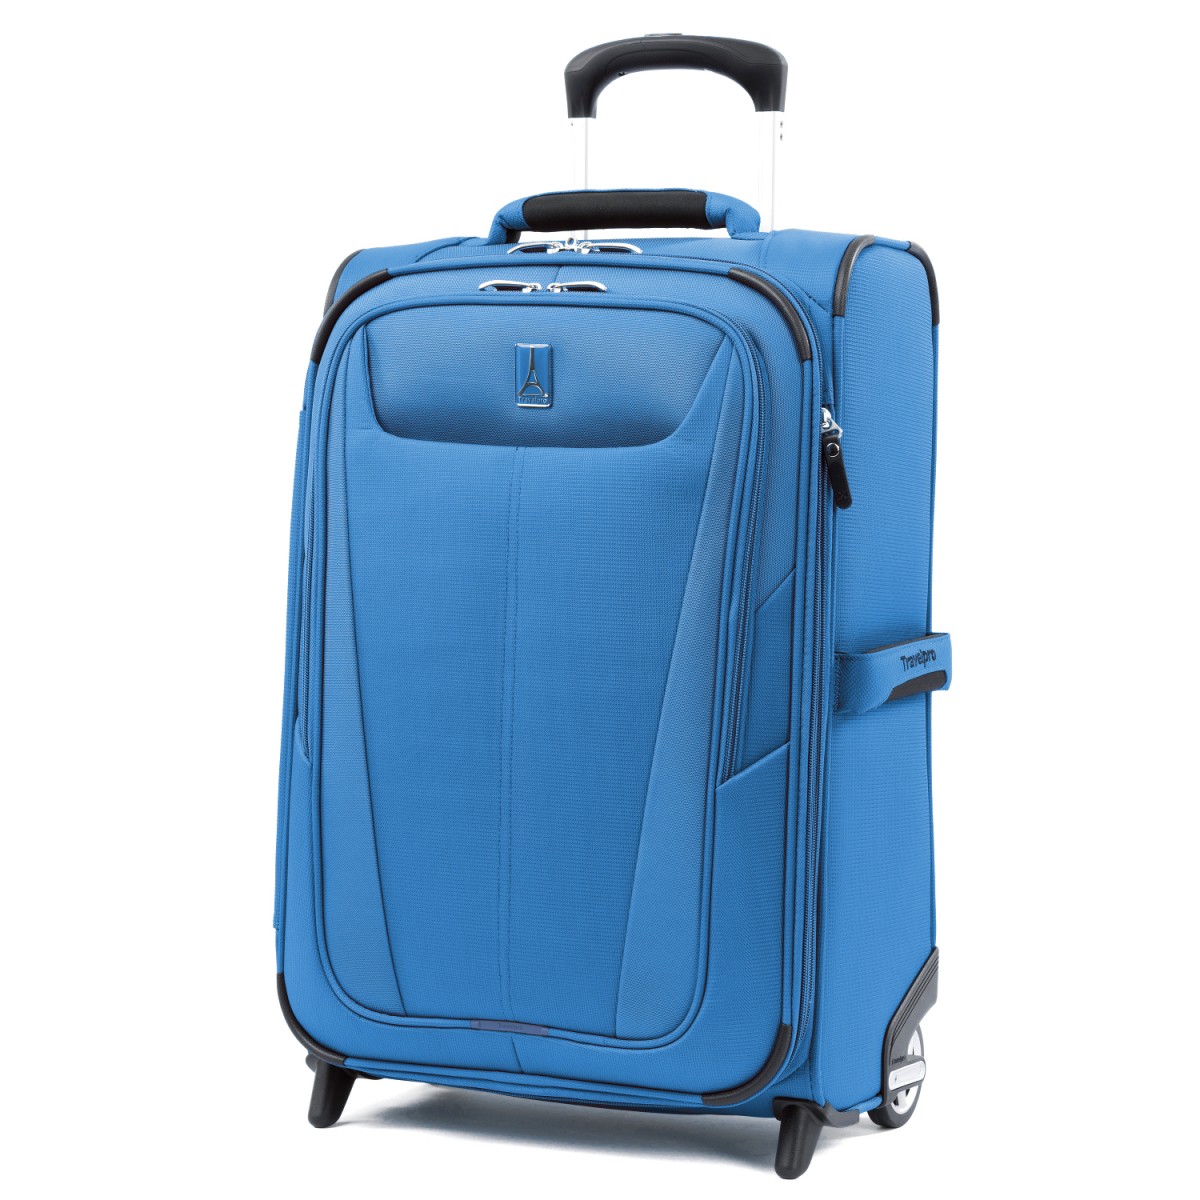 travelpro maxlite 5 22 expandable rollaboard carry on luggage review